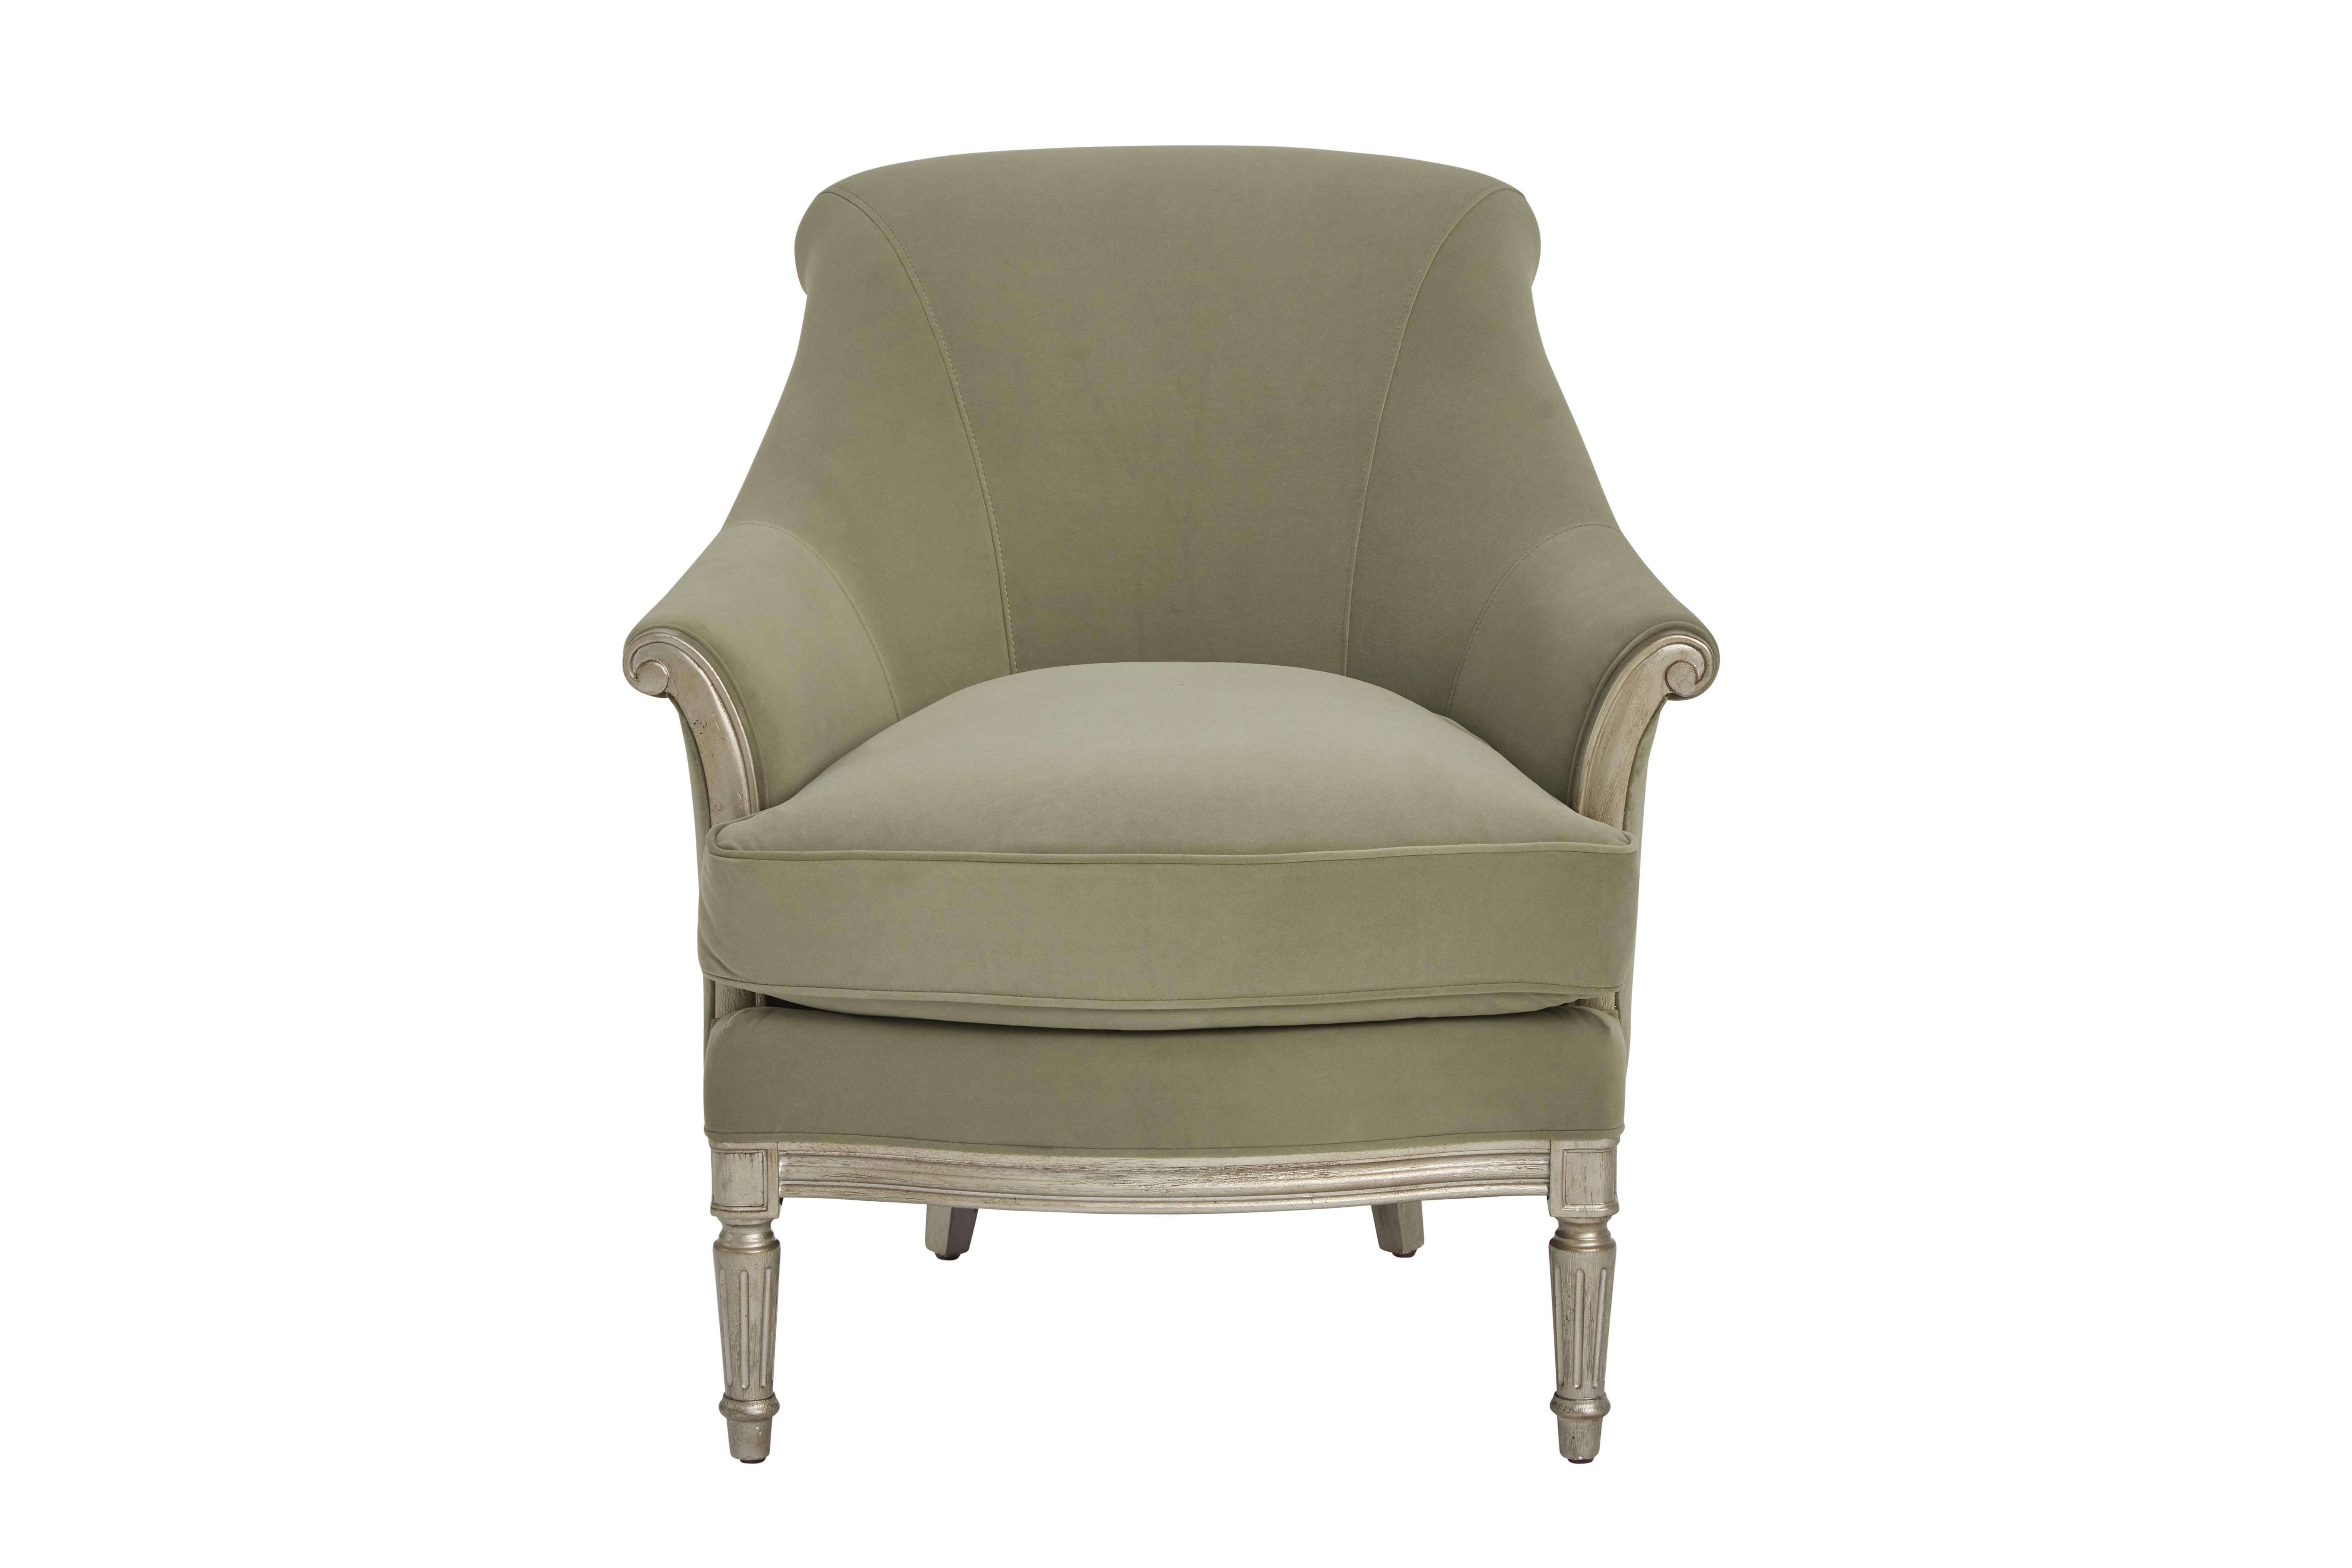 Contemporary, Modern Arm Chairs Charlotte Emerald 176534-5227AA in Green Fabric